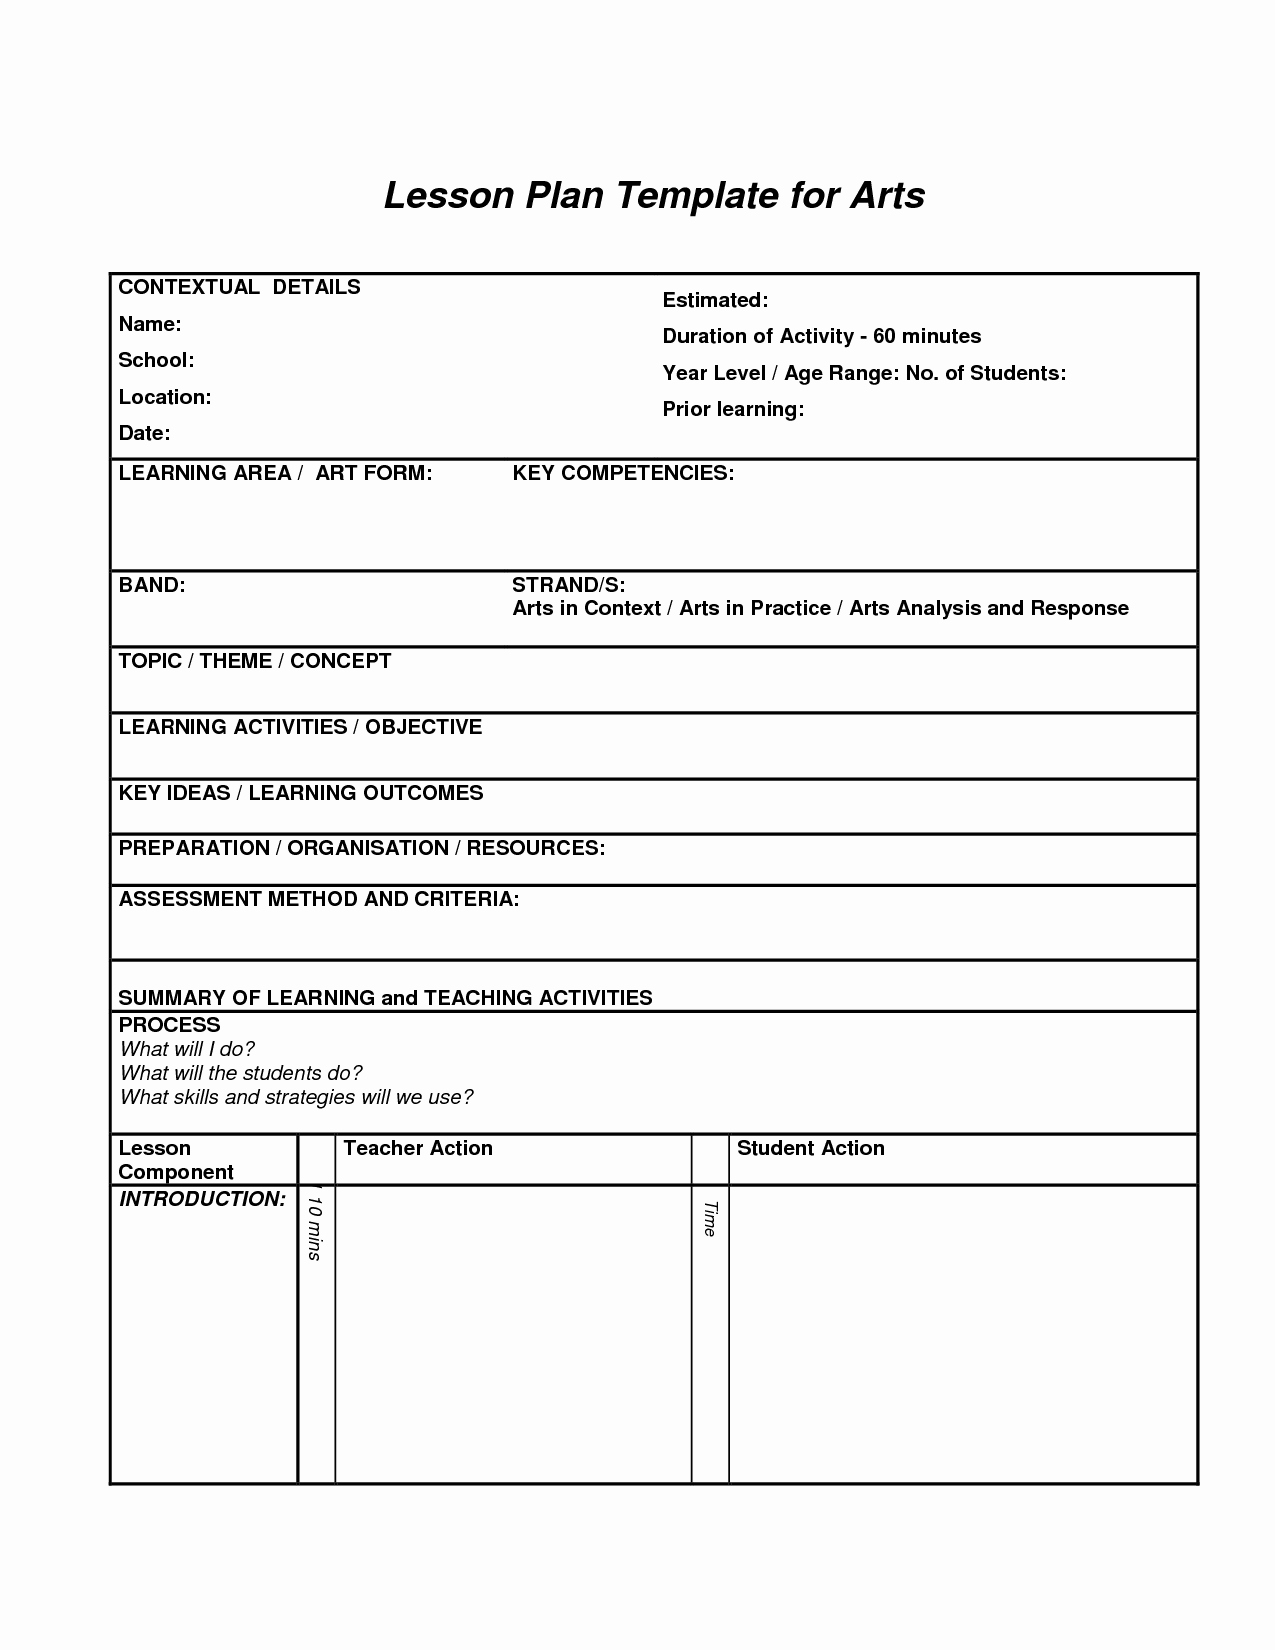 Unit Lesson Plan Template New Lesson Plan Template for Arts